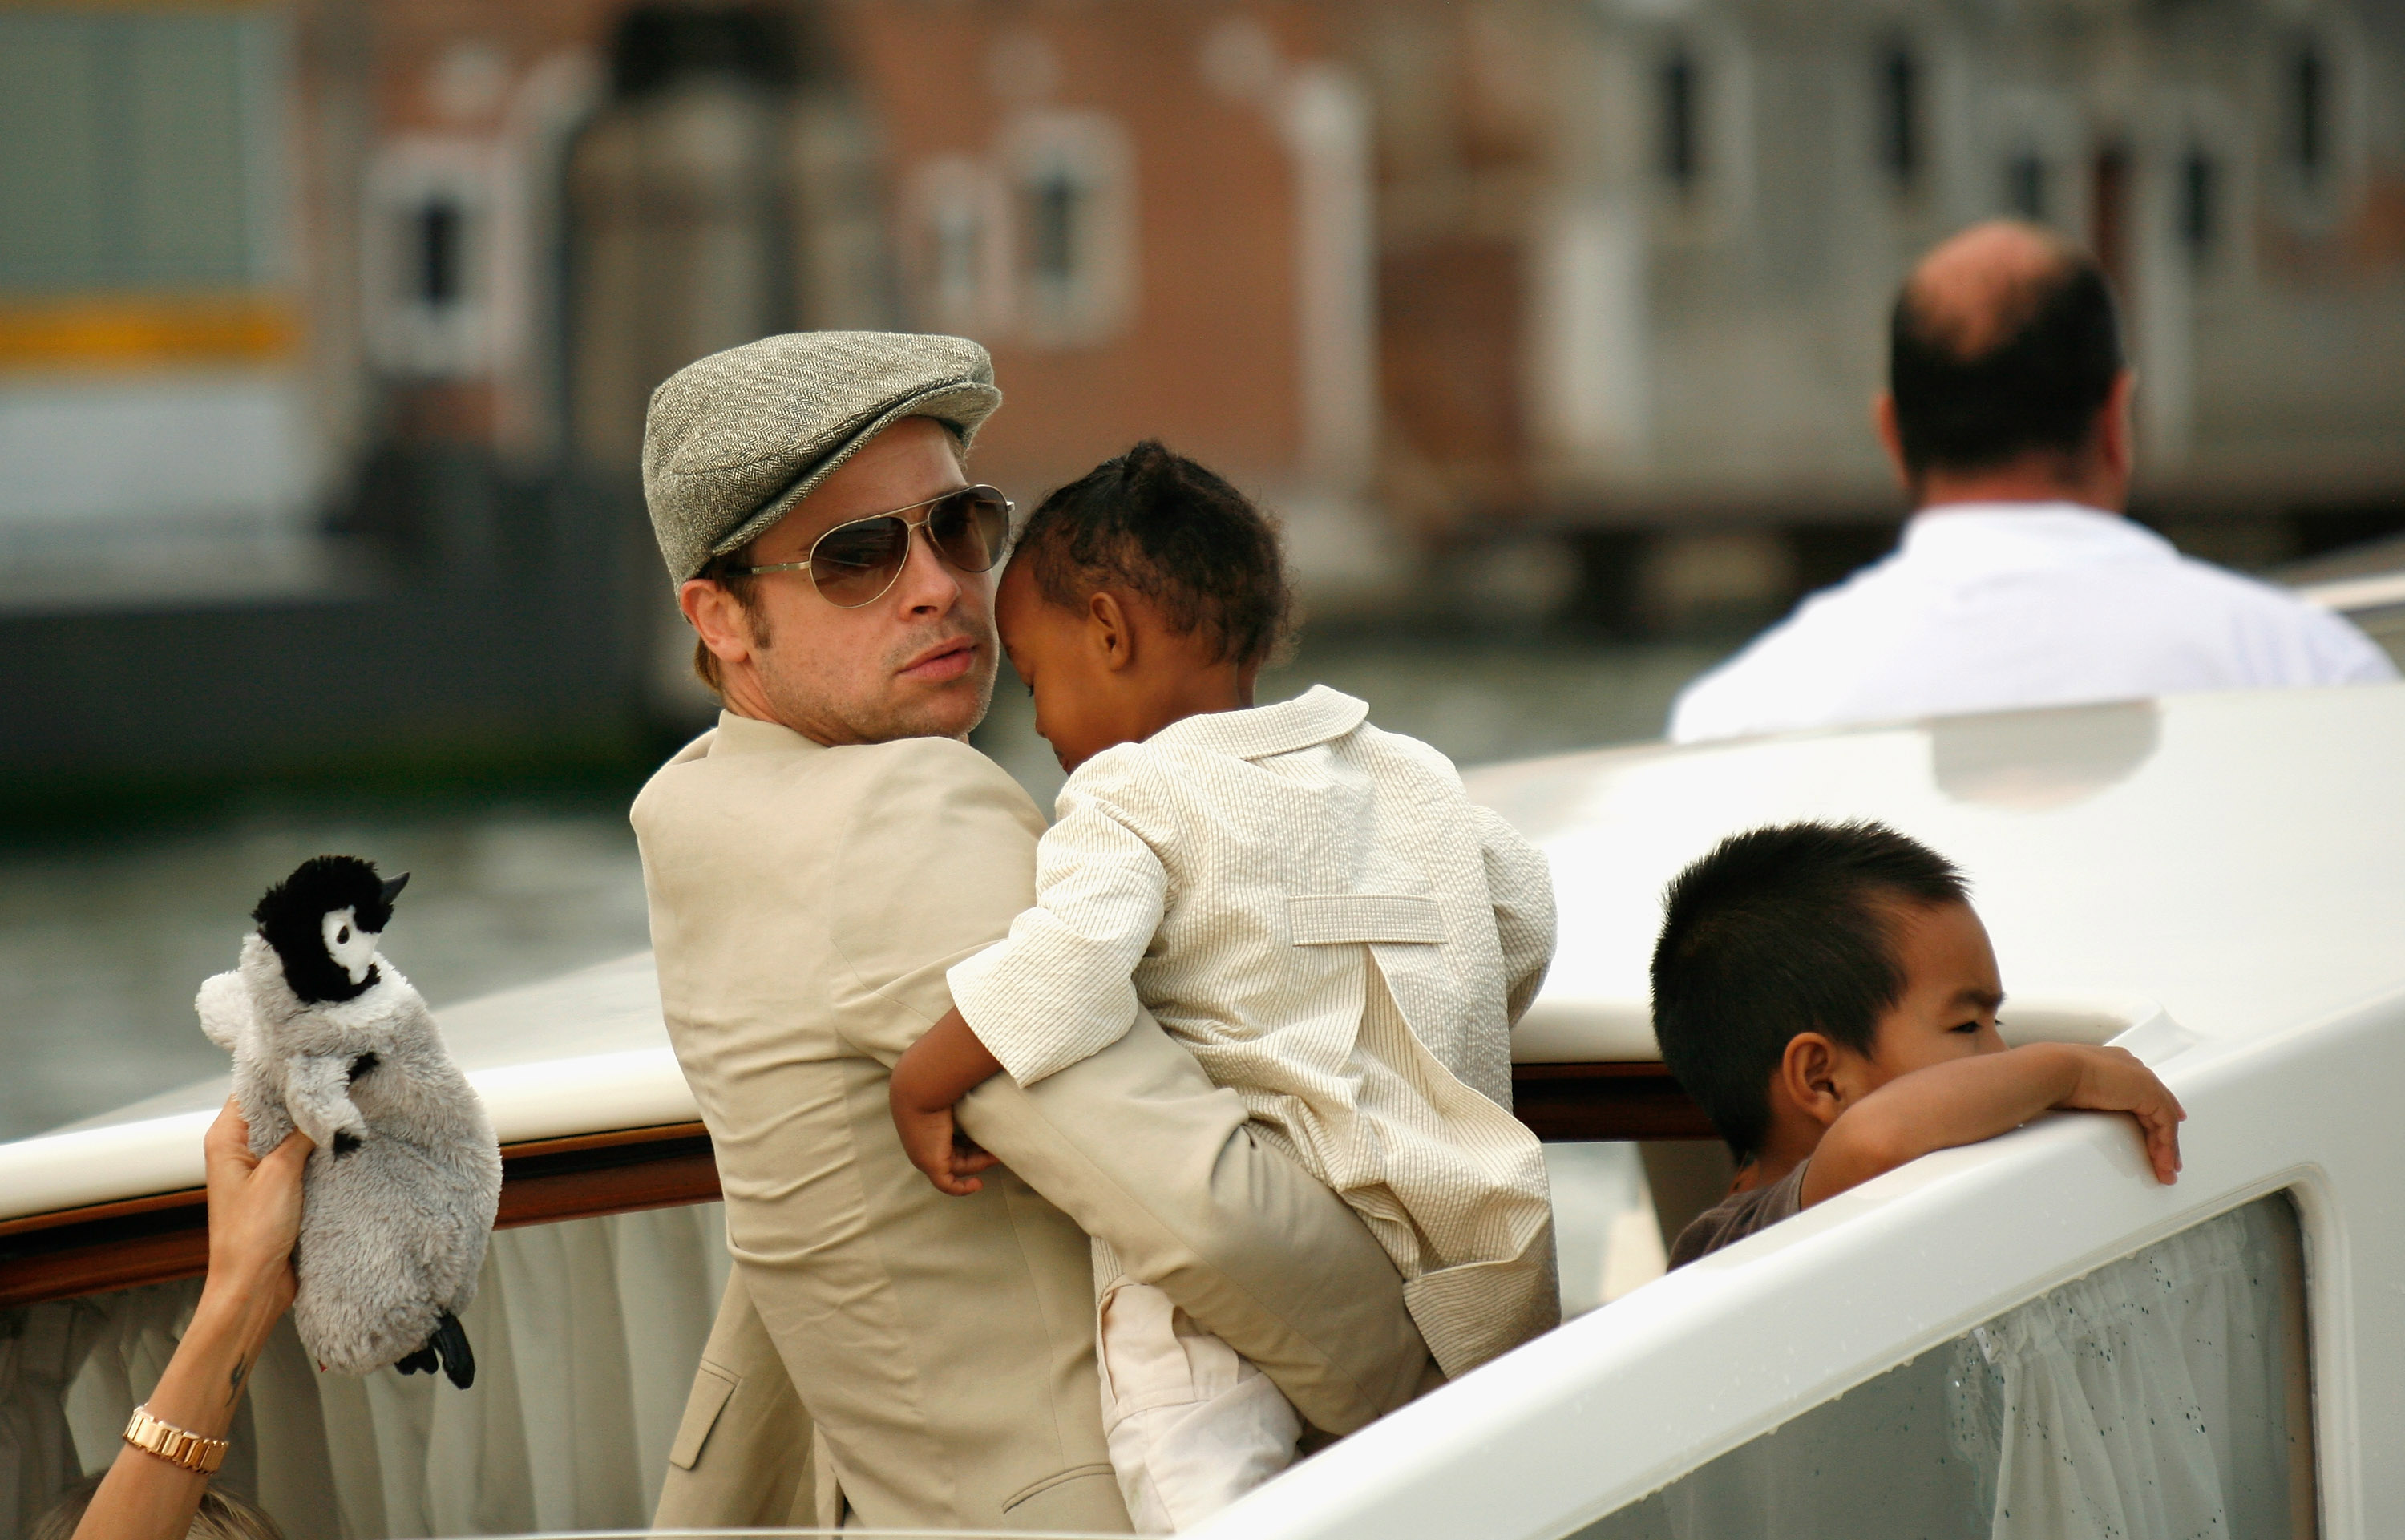 Brad Pitt and two of his children on September 3, 2007 in Venice. | Source: Getty Images